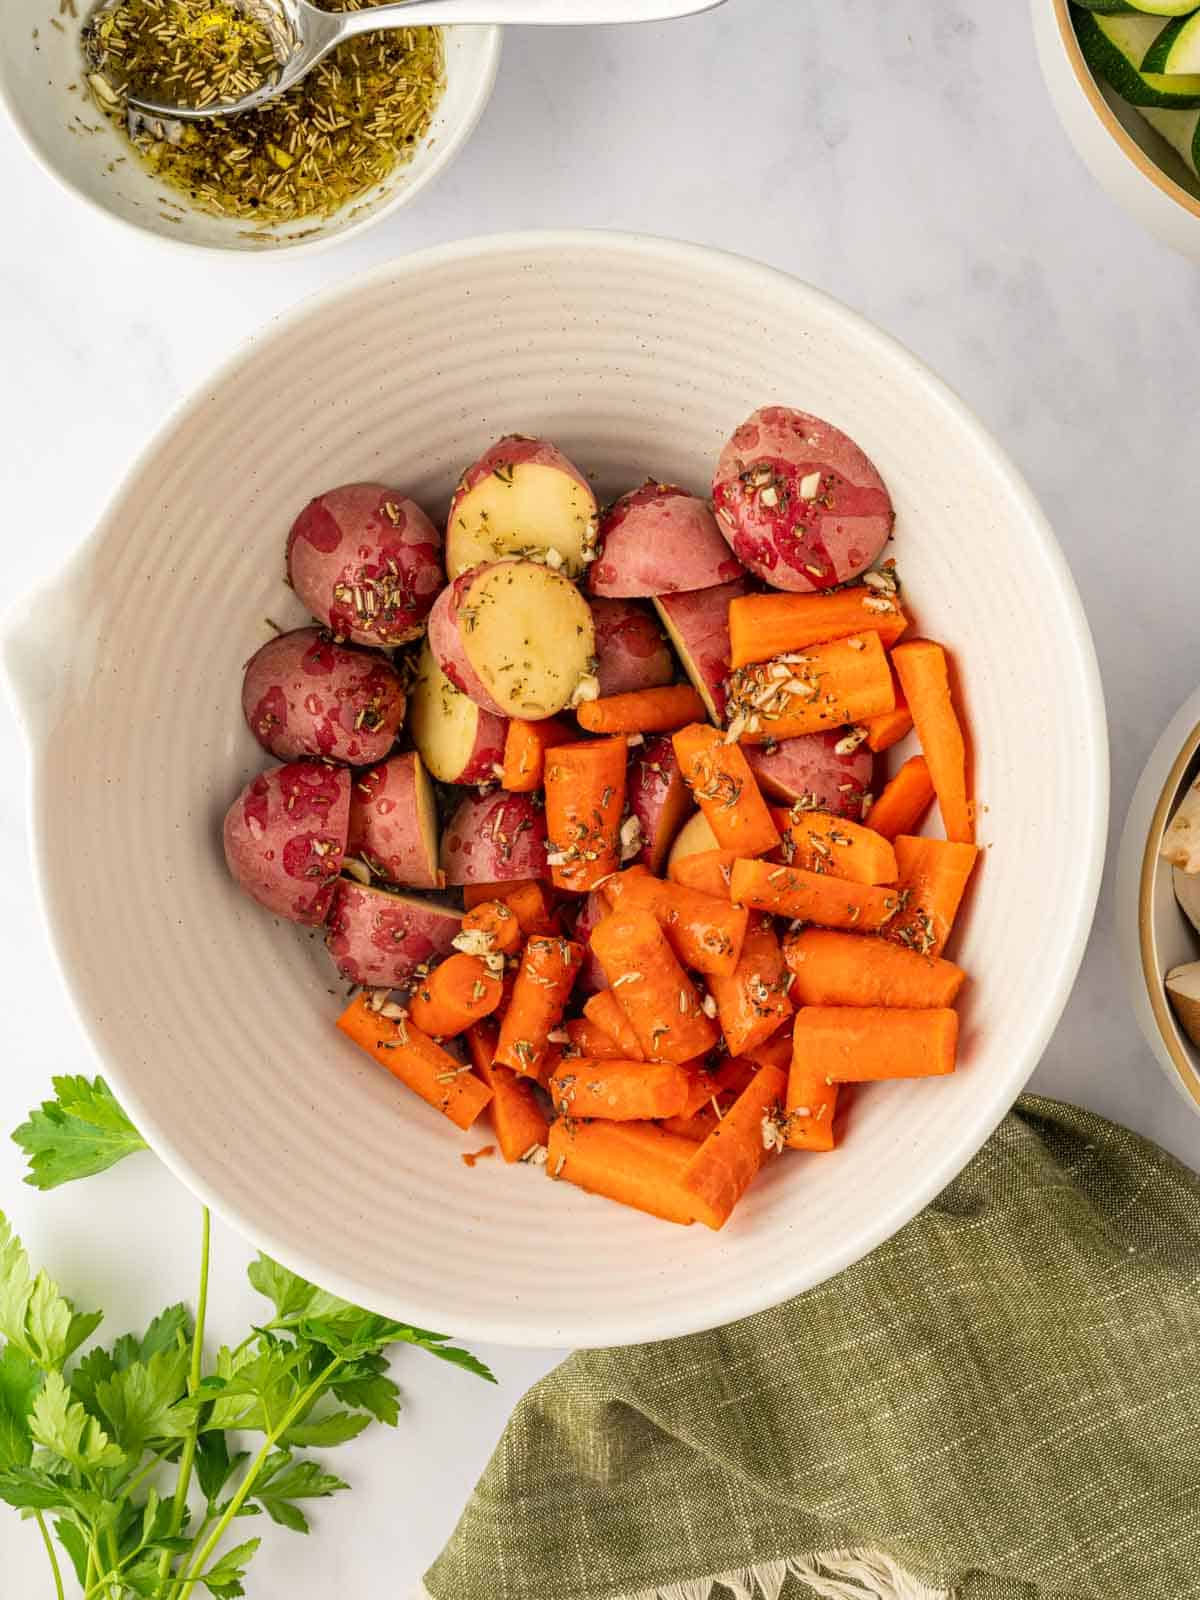 Marinated carrots and potatoes in a bowl.